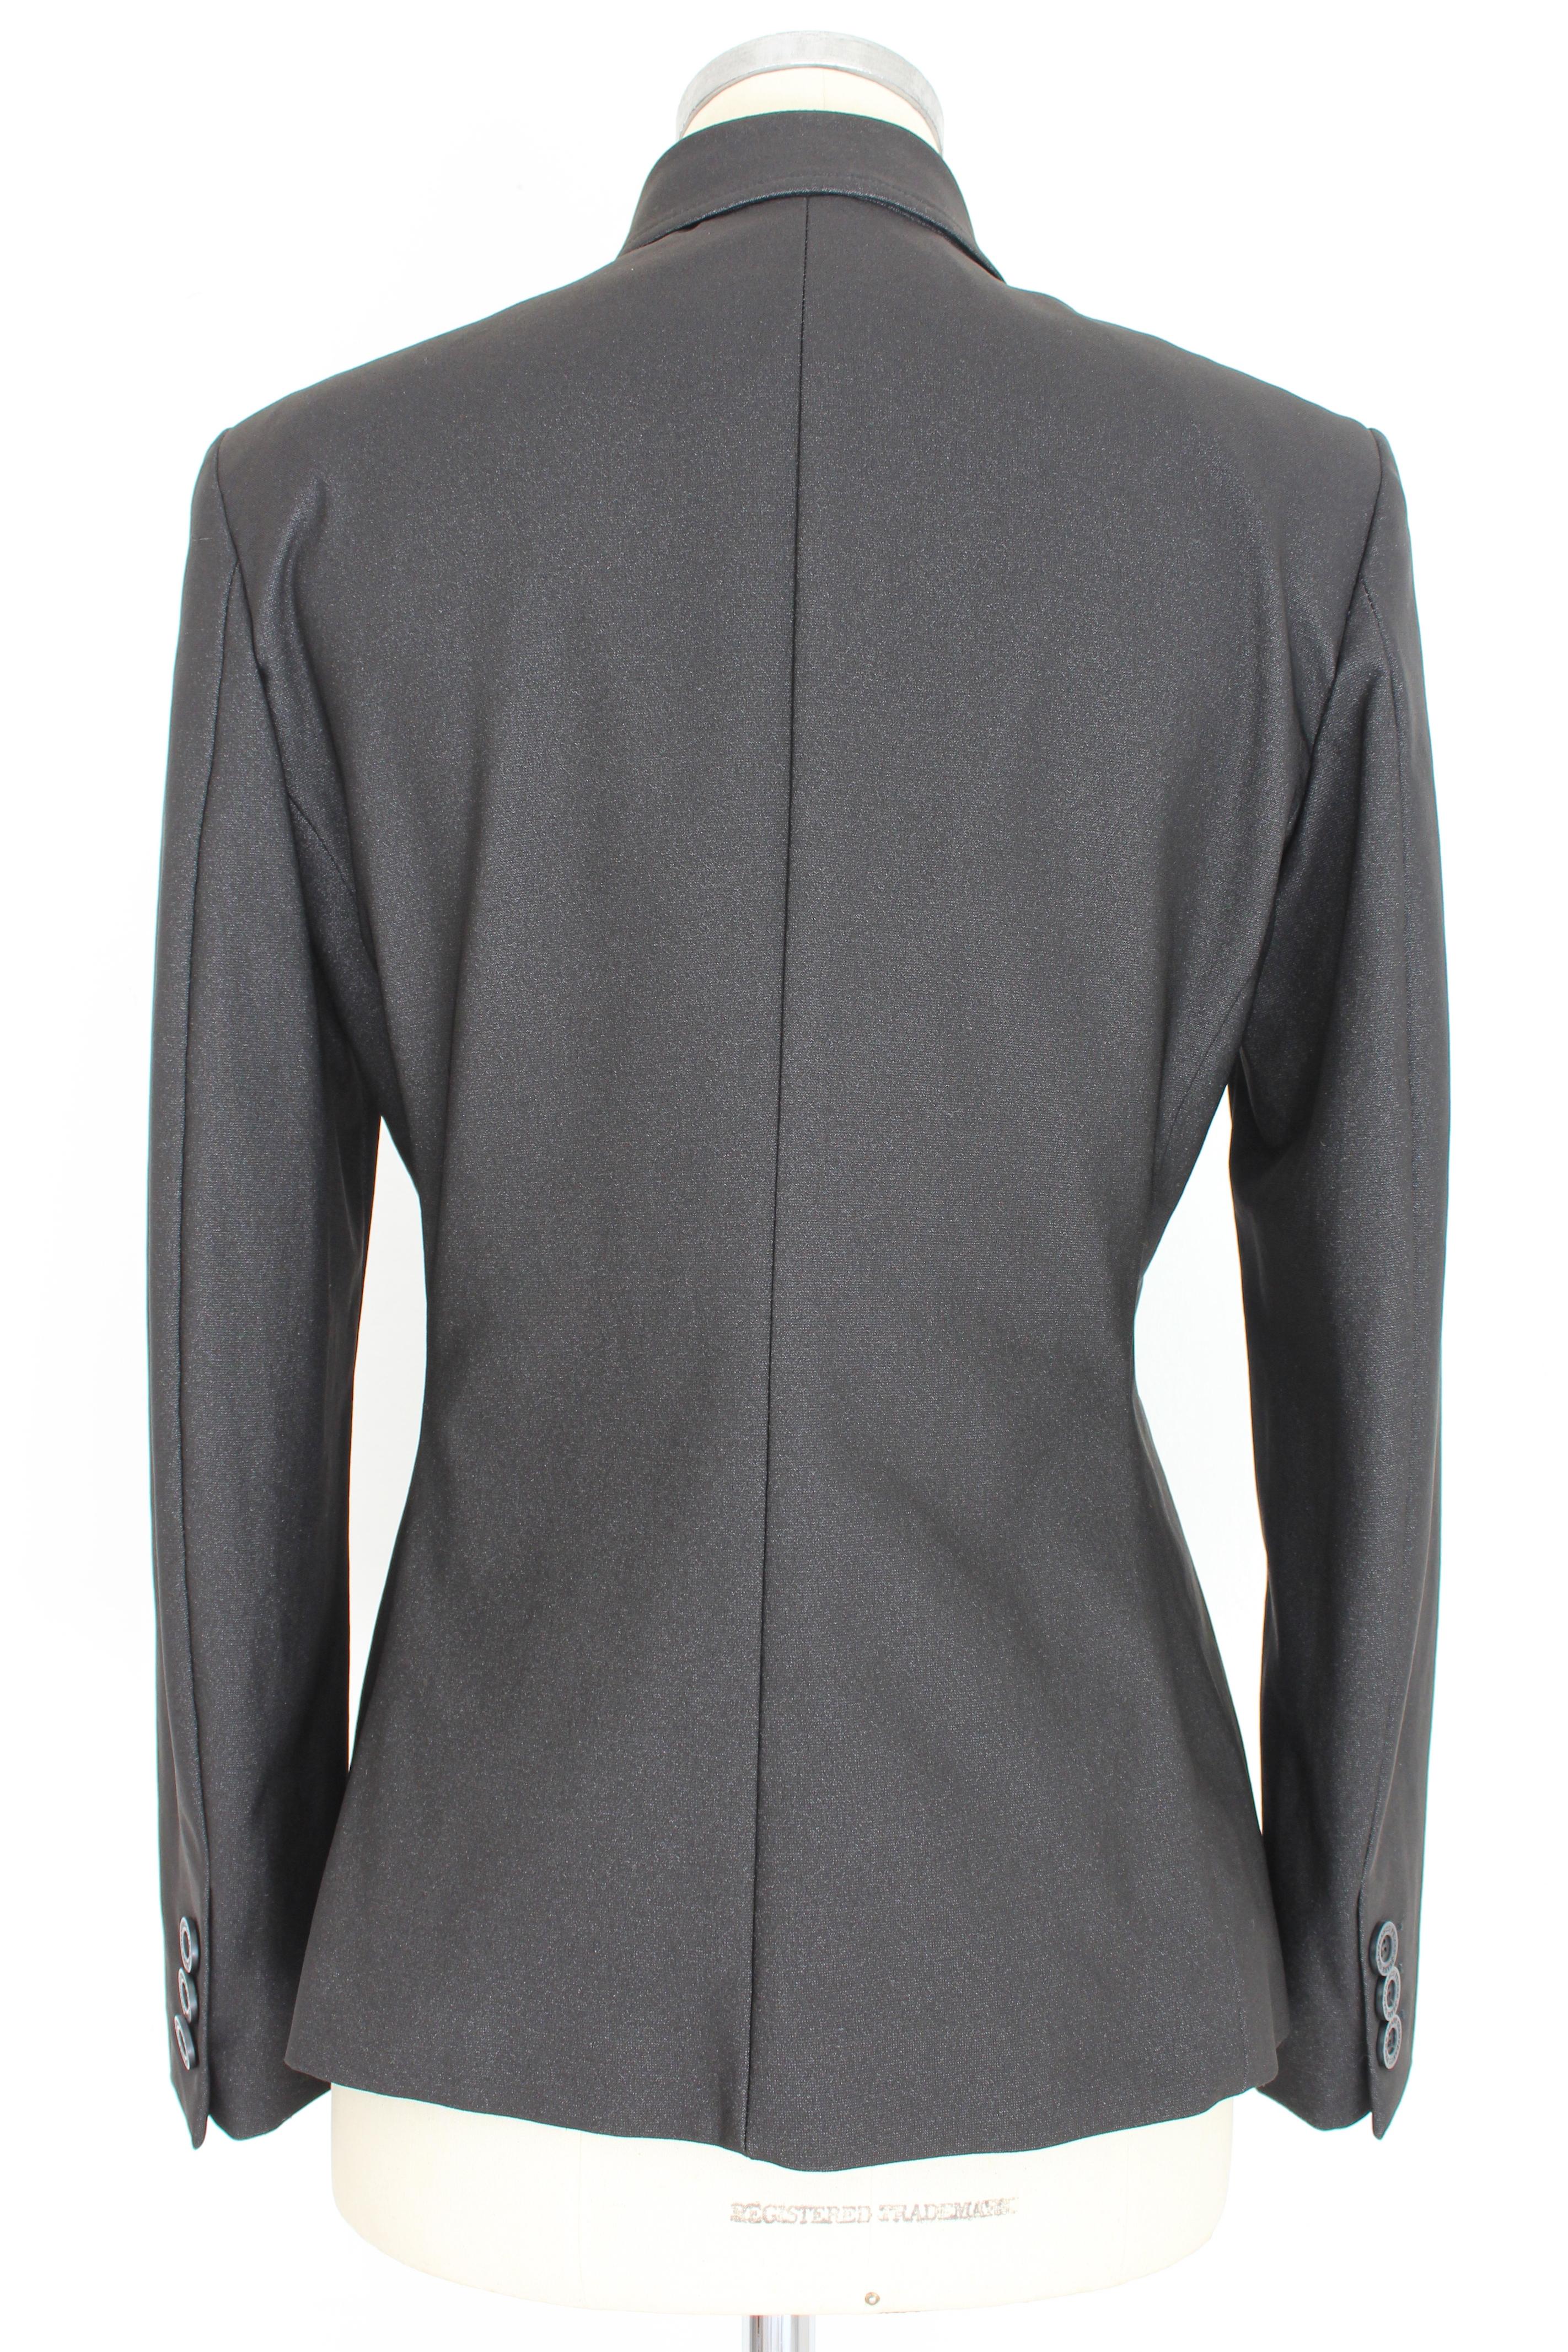 Gianfranco Ferre Black Jeans Fitted Jacket In Excellent Condition For Sale In Brindisi, Bt